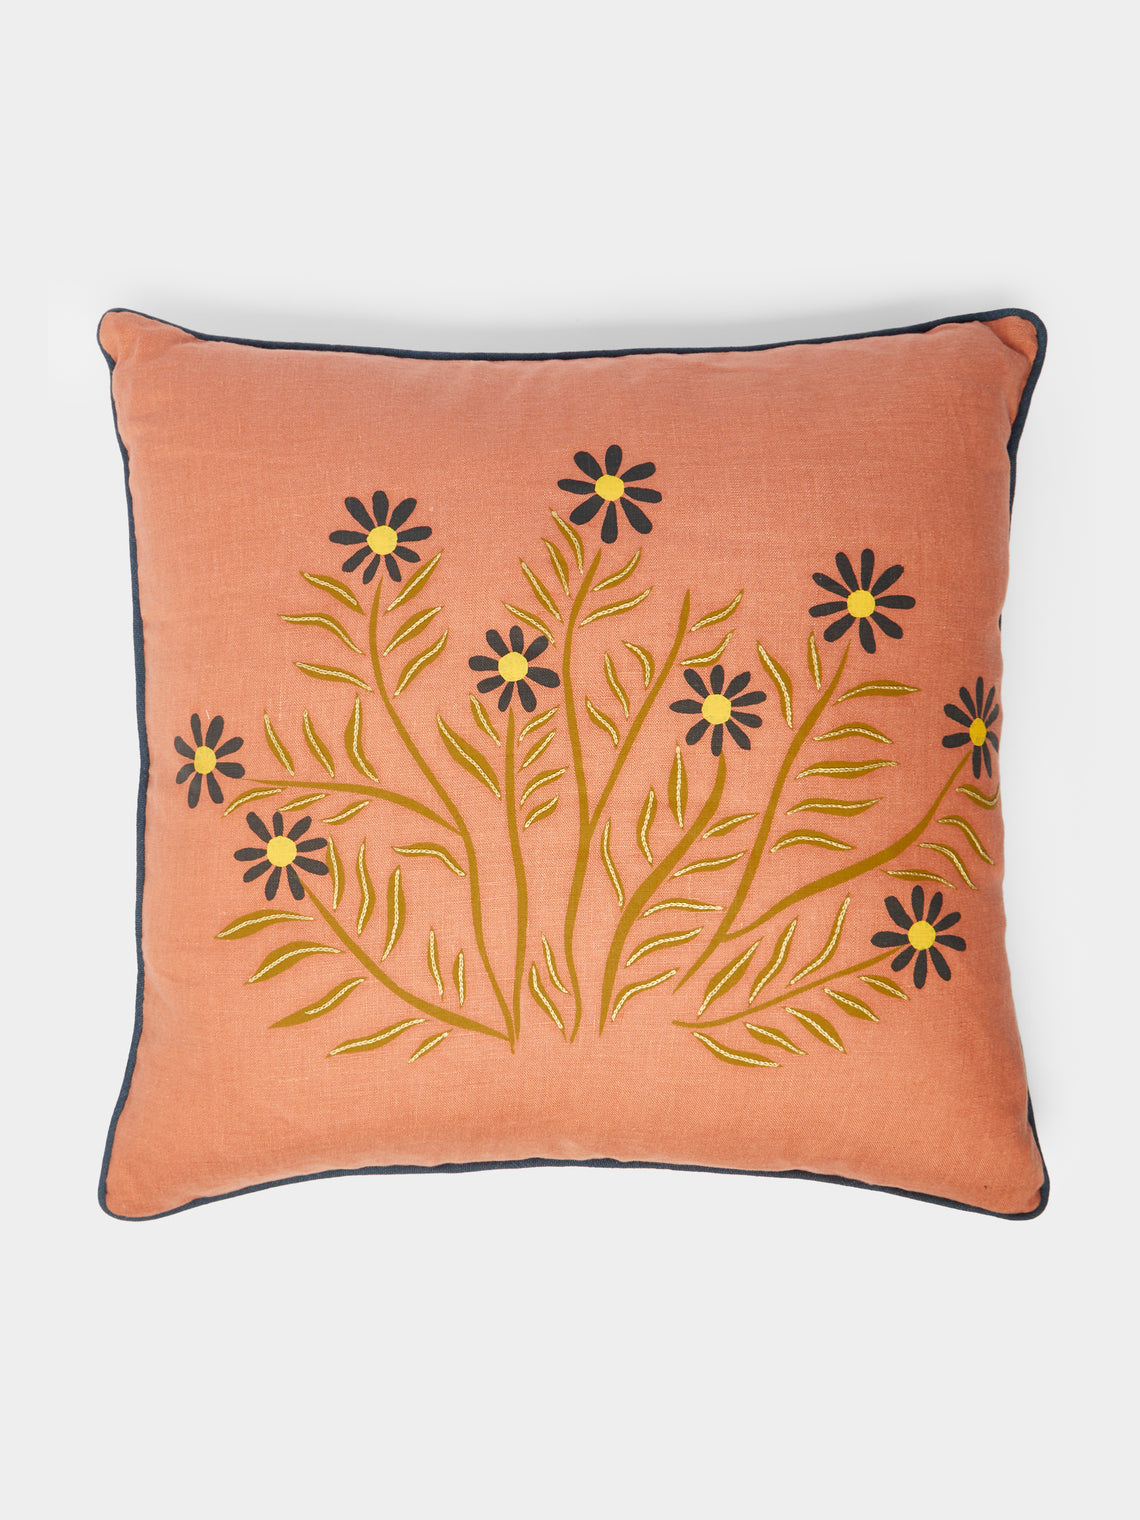 Rosemary Milner - Printed Floral Cotton Cushion -  - ABASK - 